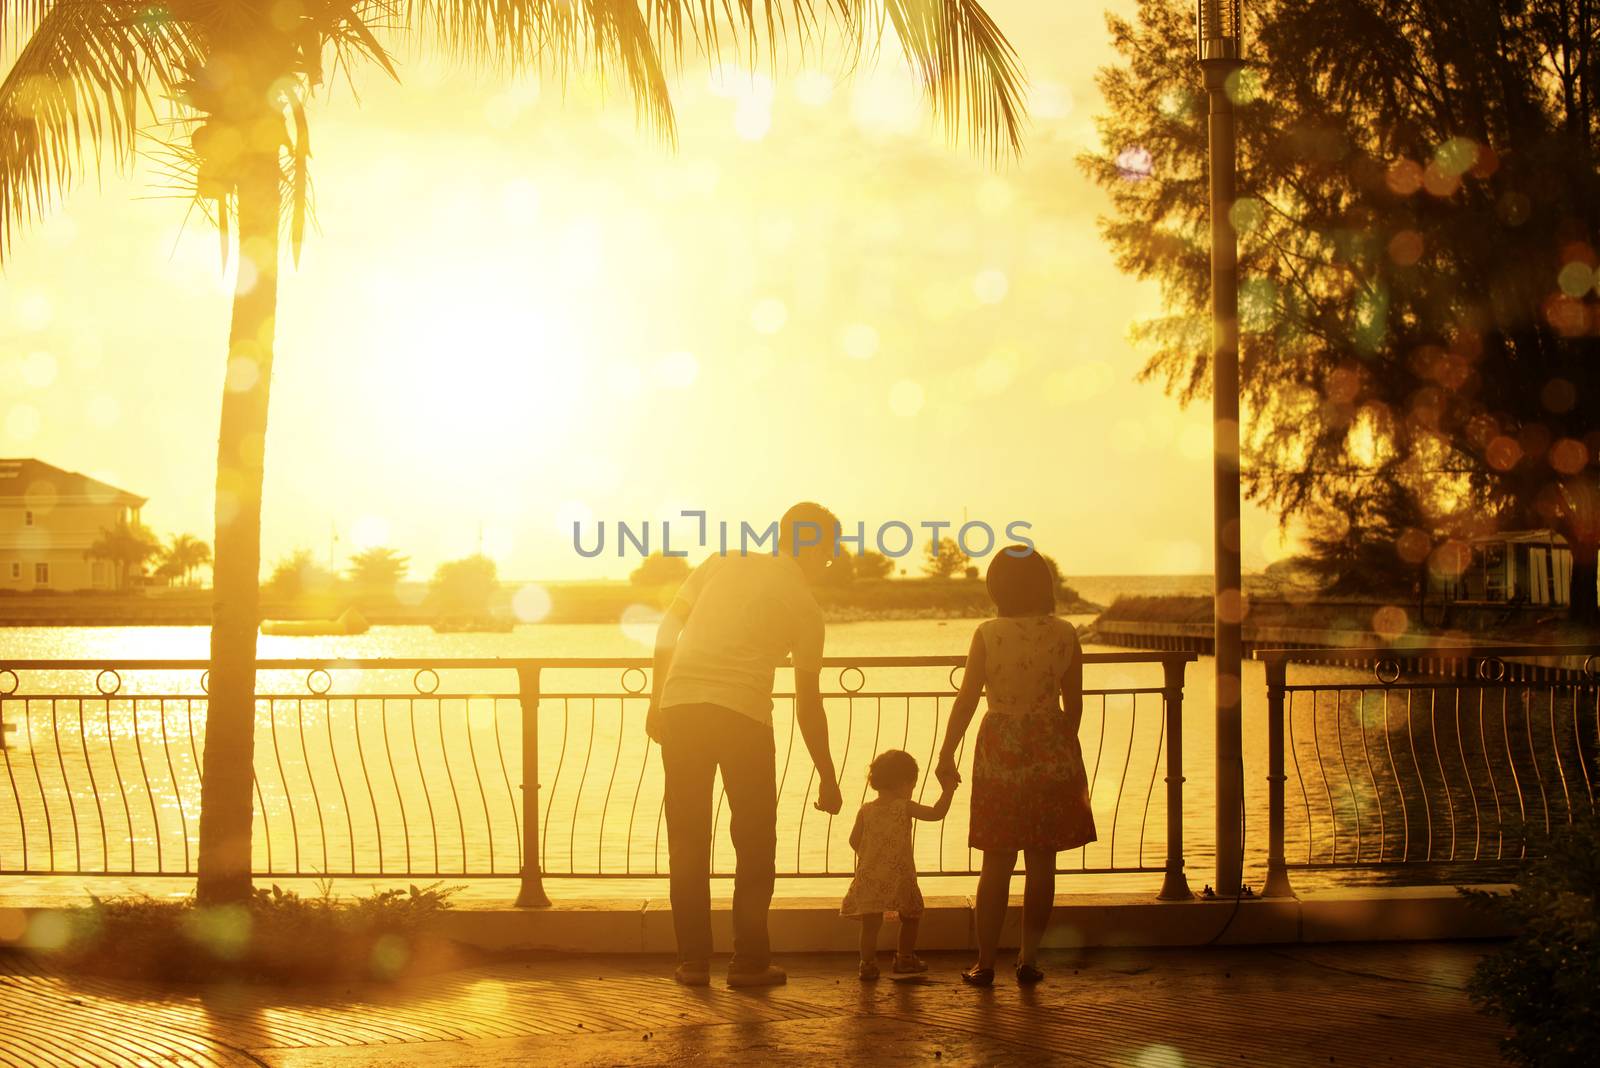 Rear view silhouette of young family enjoying outdoor activity together, walking in beautiful sunset during holiday vacation.